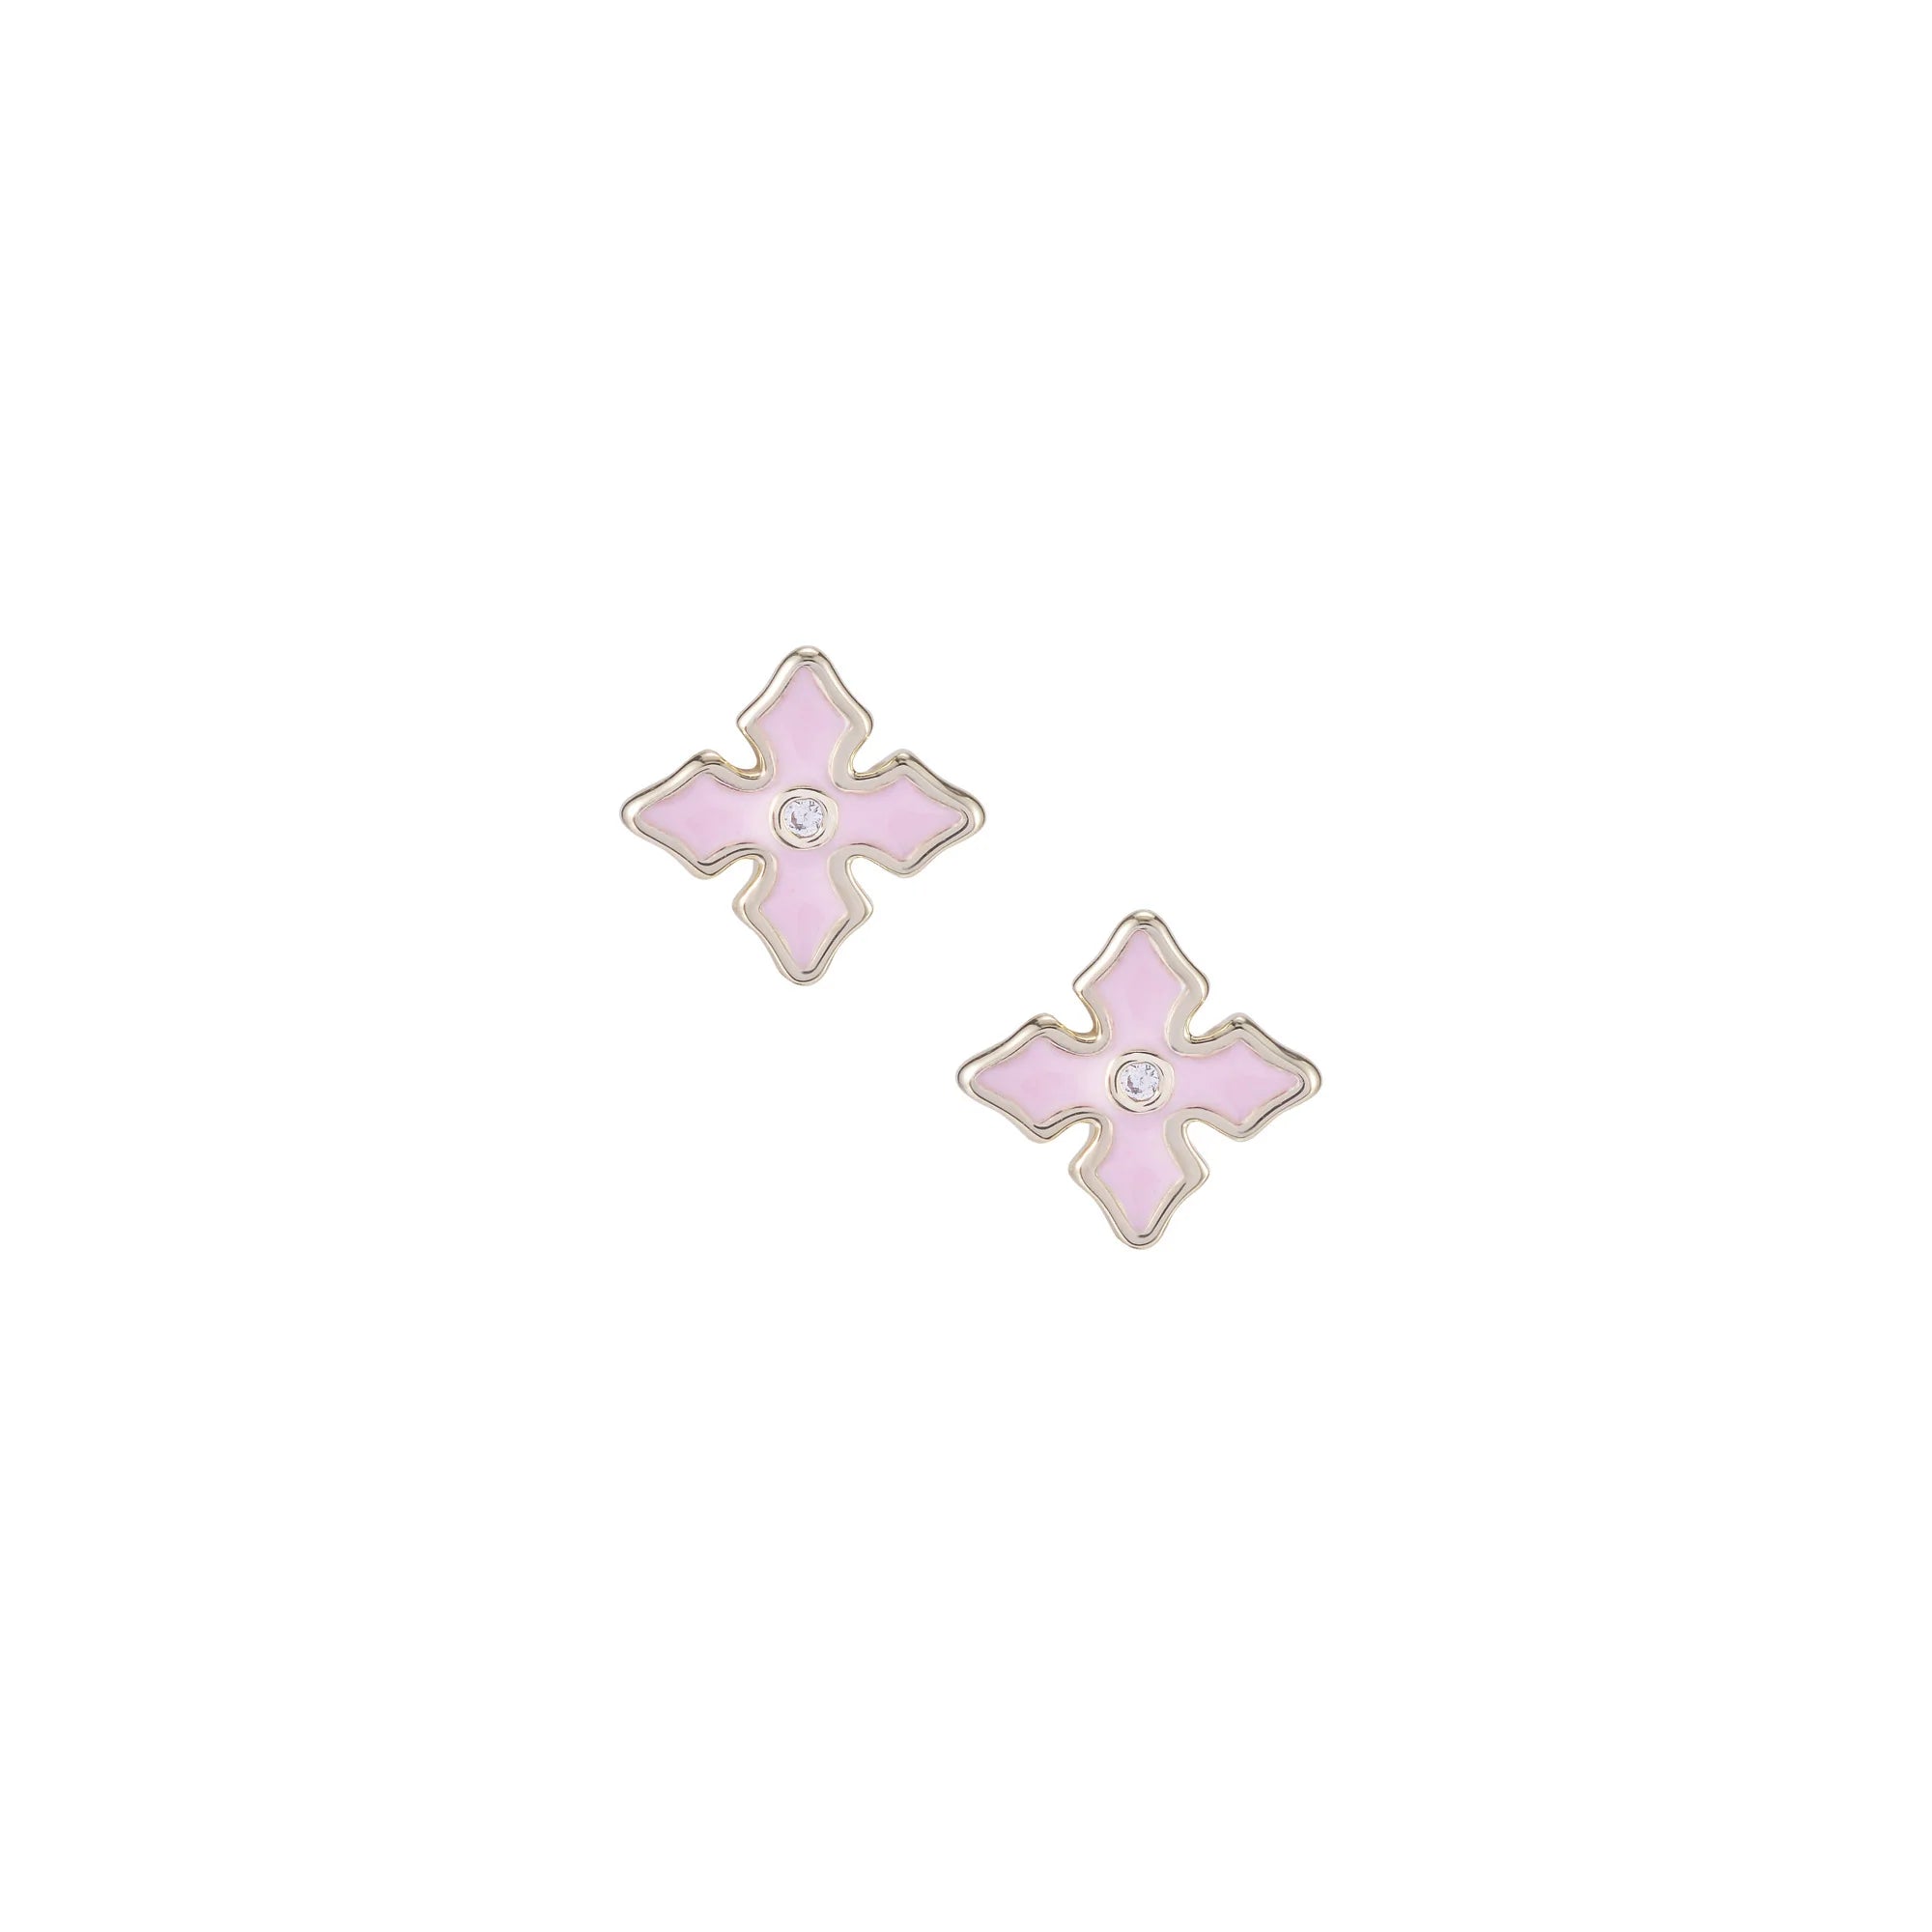 Natalie Wood - Mini Cross Earrings in Pink/Gold-110 Jewelry & Hair-Natalie Wood-July & June Women's Fashion Boutique Located in San Antonio, Texas